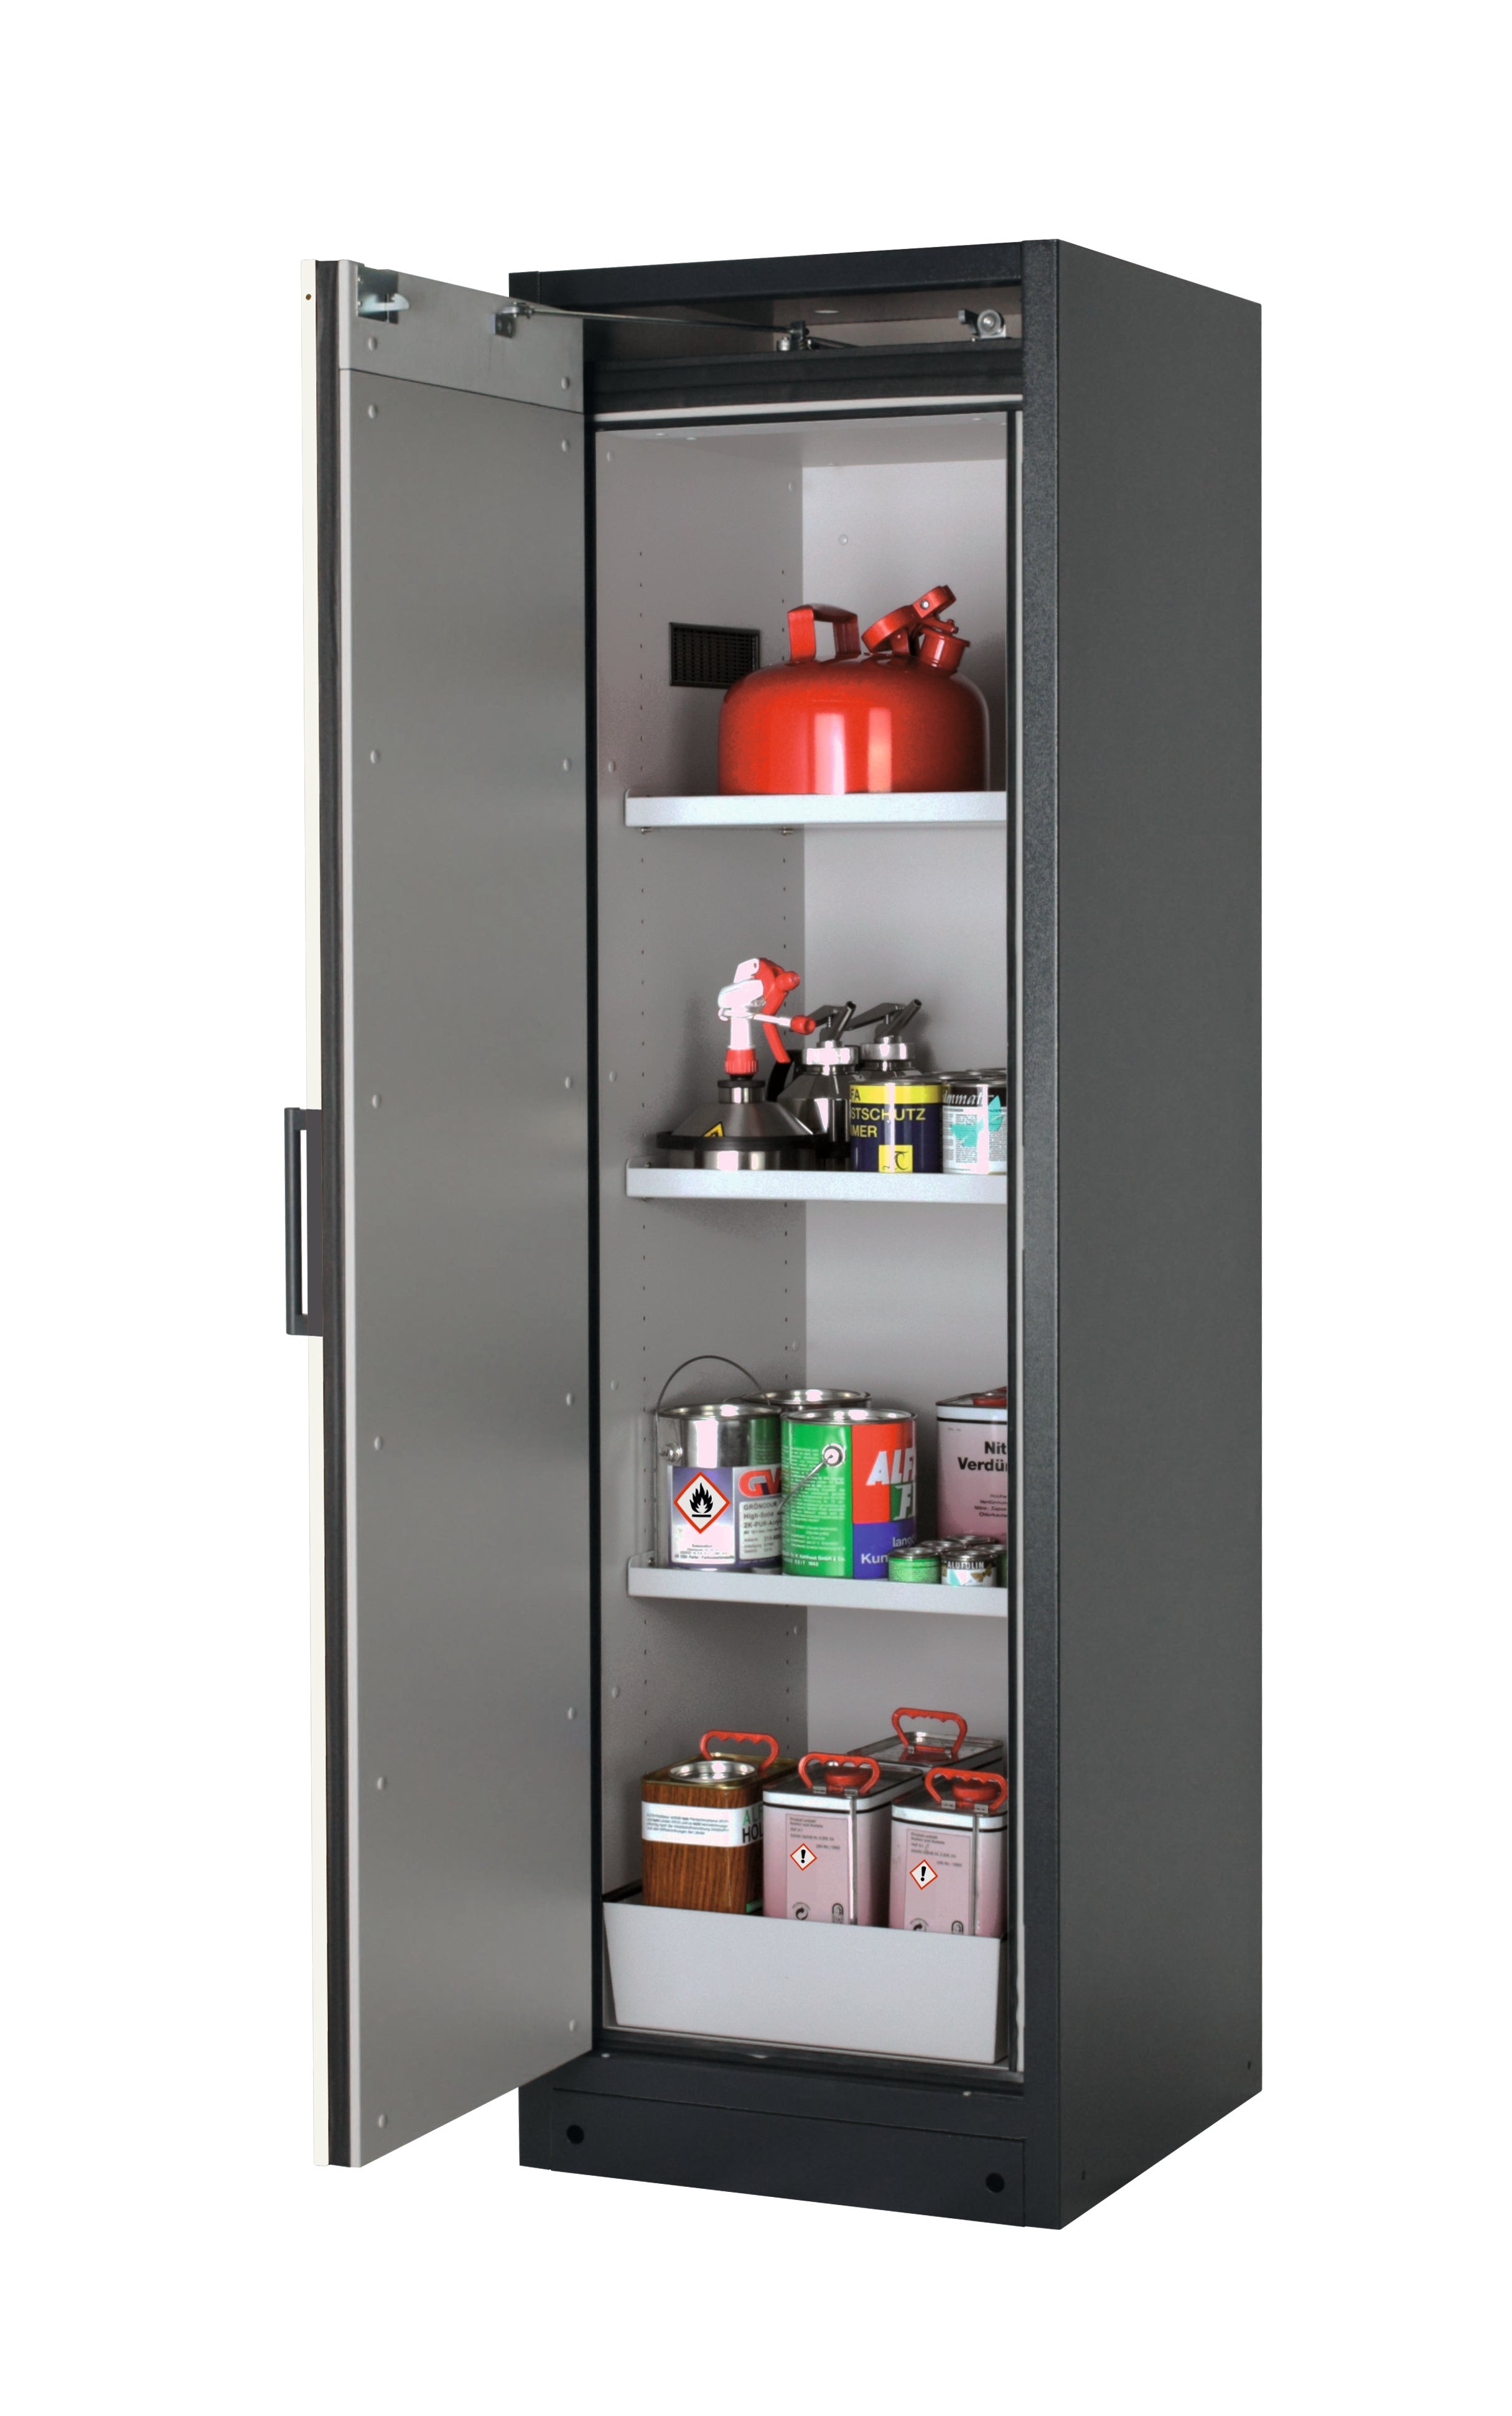 Type 90 safety storage cabinet Q-CLASSIC-90 model Q90.195.060 in asecos silver with 3x shelf standard (sheet steel),